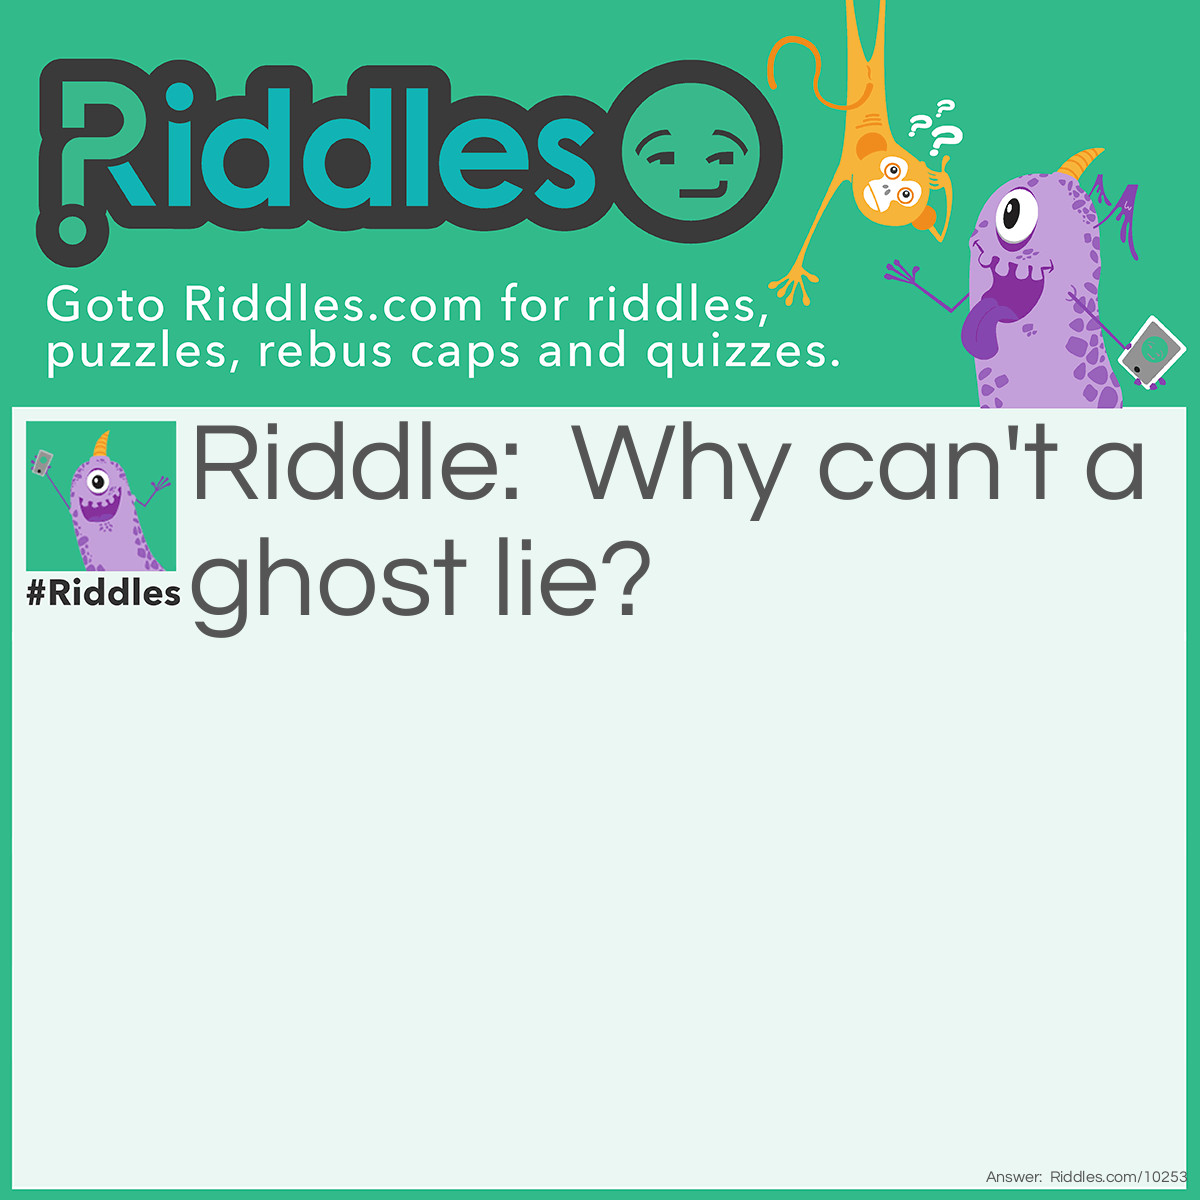 Riddle: Why can't a ghost lie? Answer: Because you can see through it.